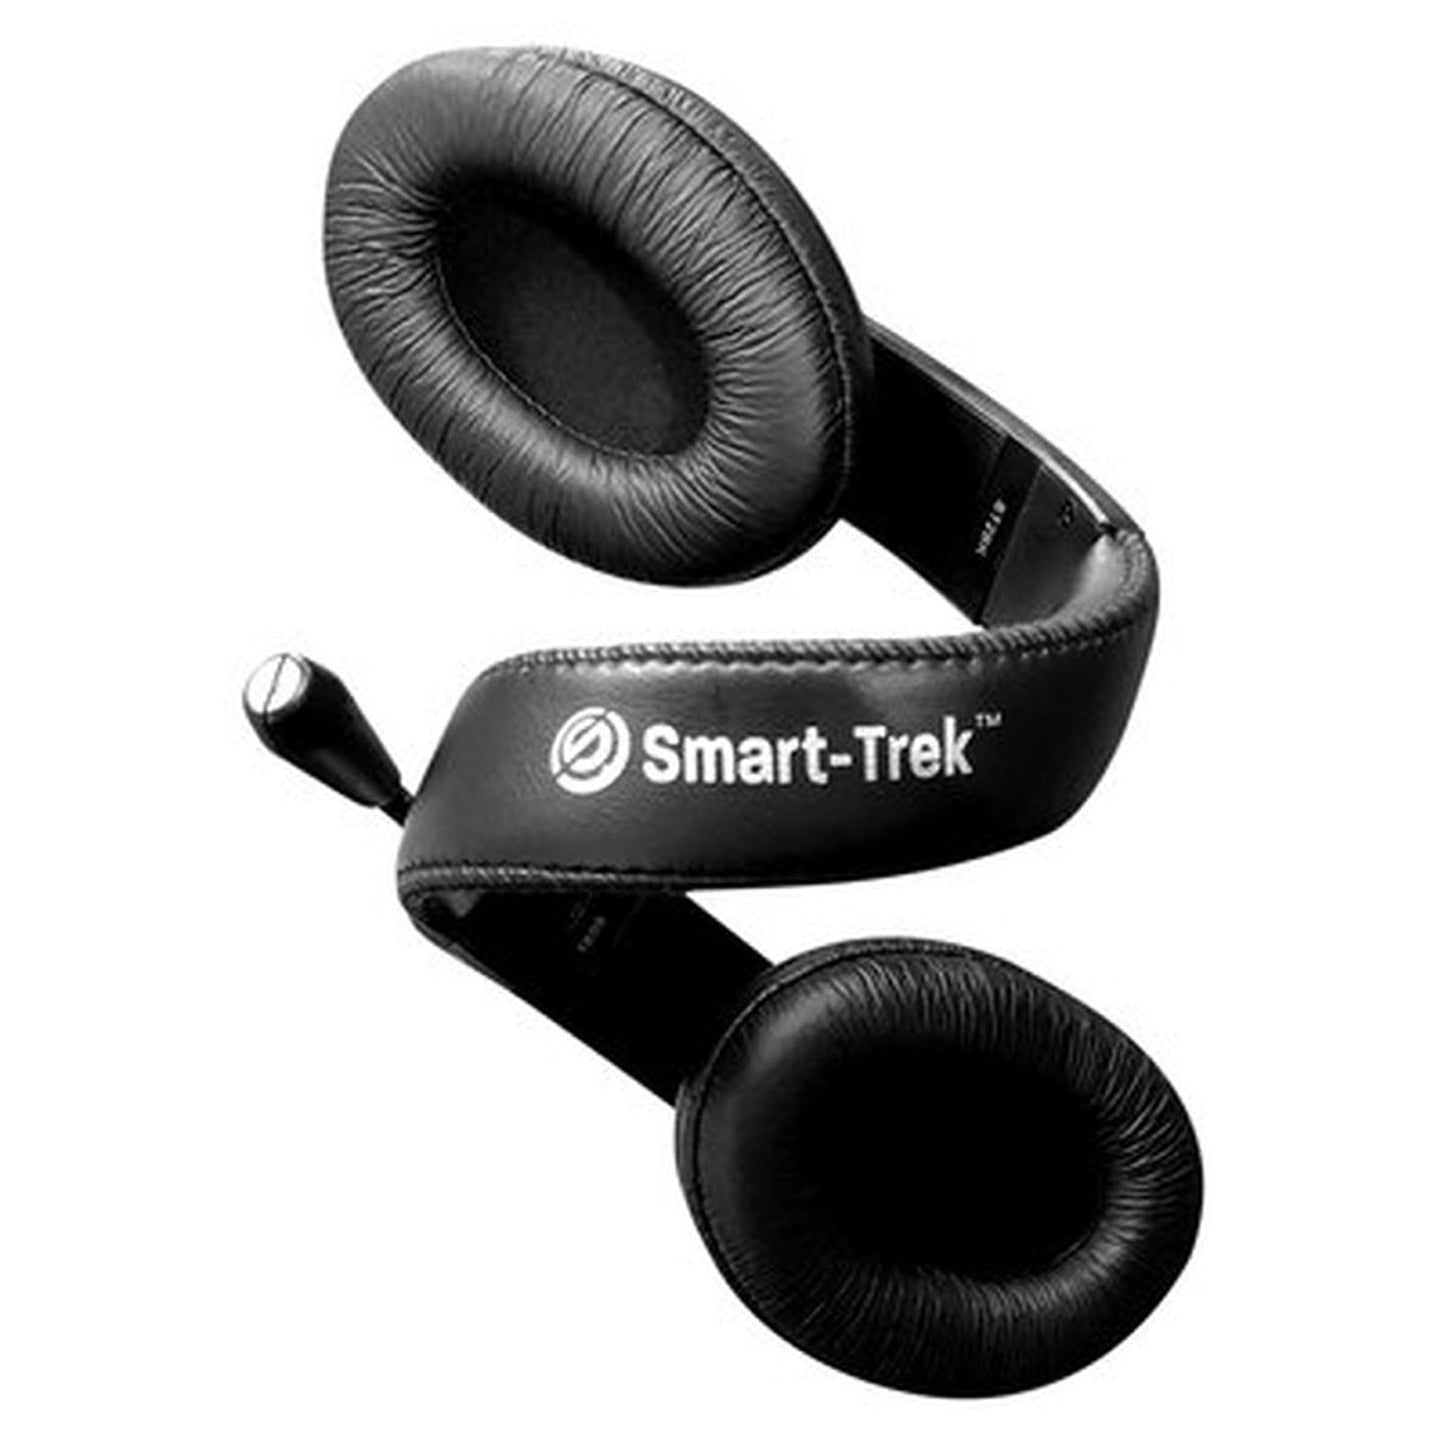 Smart-Trek Deluxe Stereo Headset with In-Line Volume Control & 3.5mm TRRS Plug, Pack of 2